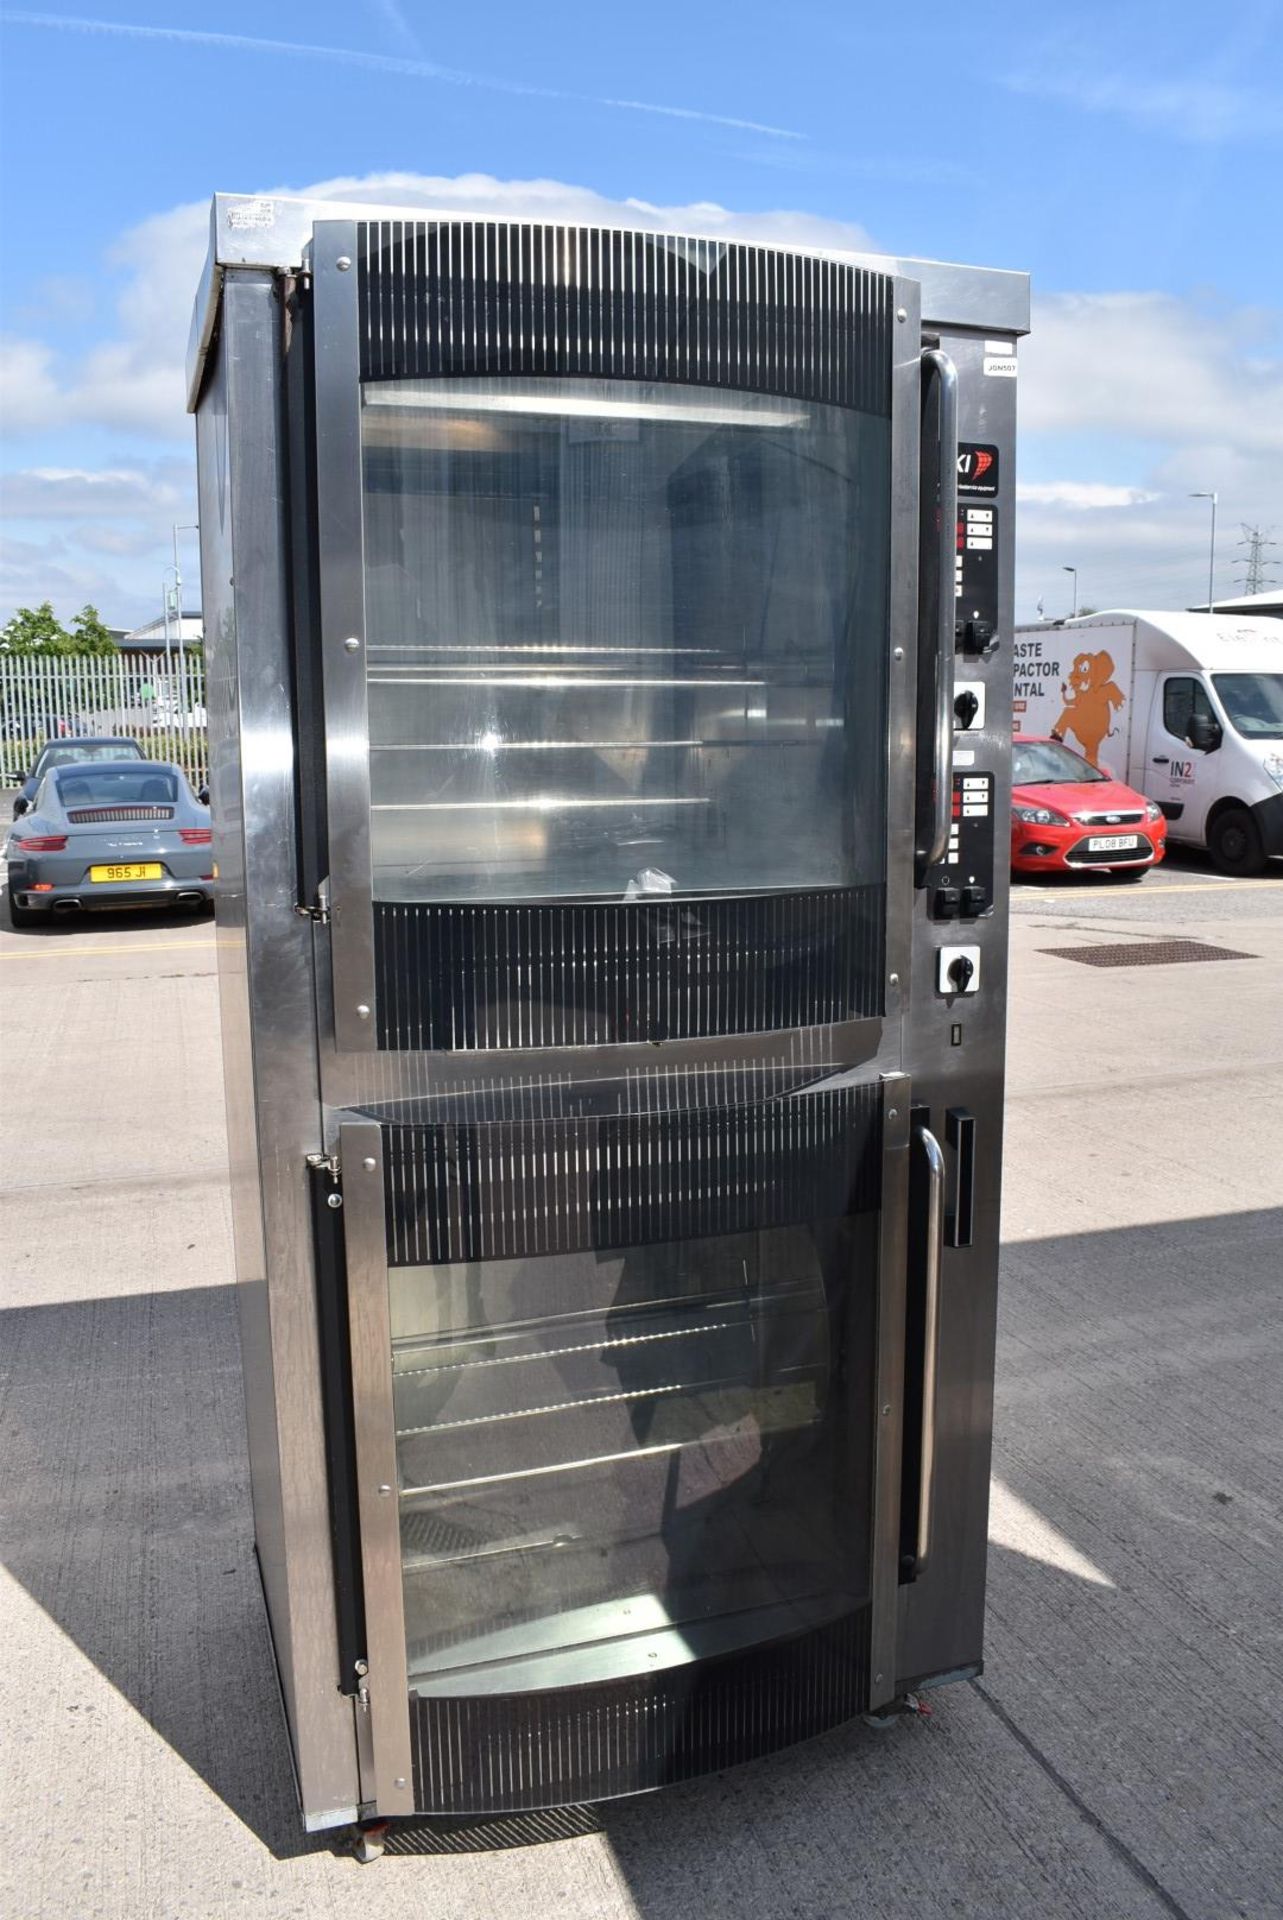 1 x BKI BBQ King Commercial Double Rotisserie Chicken Oven With Stand - Type VGUK16 - 3 Phase - Image 12 of 21